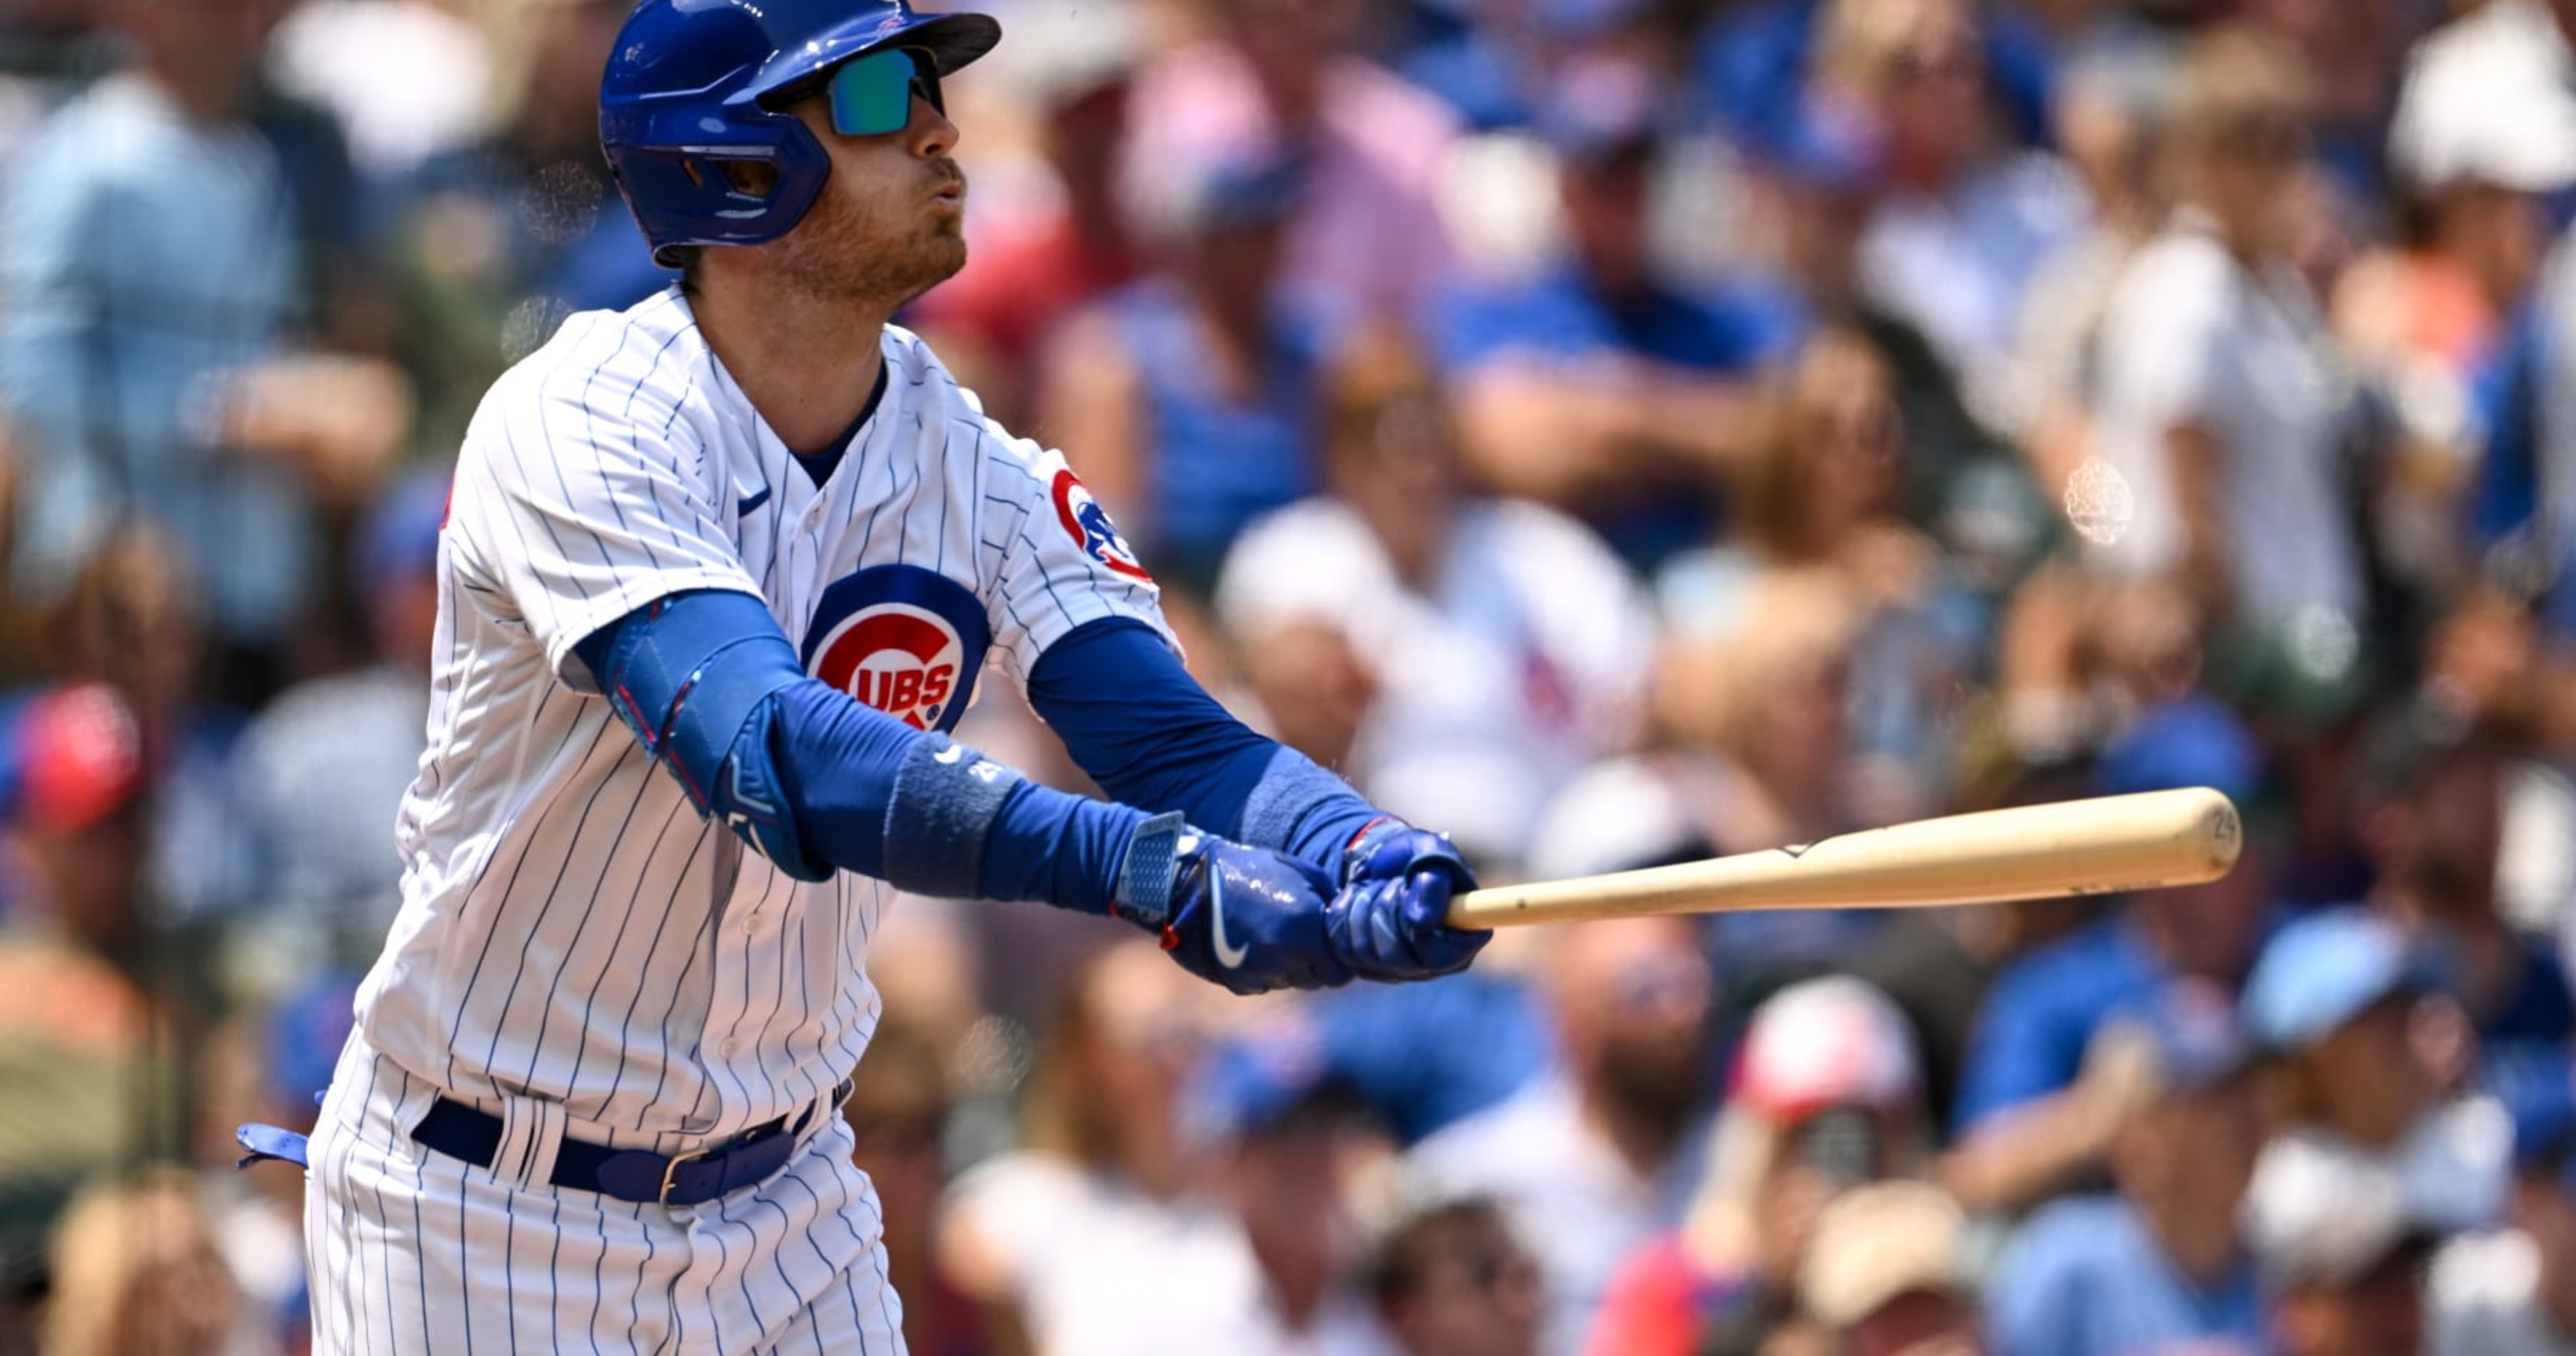 Cody Bellinger TRADE To The Chicago Cubs?